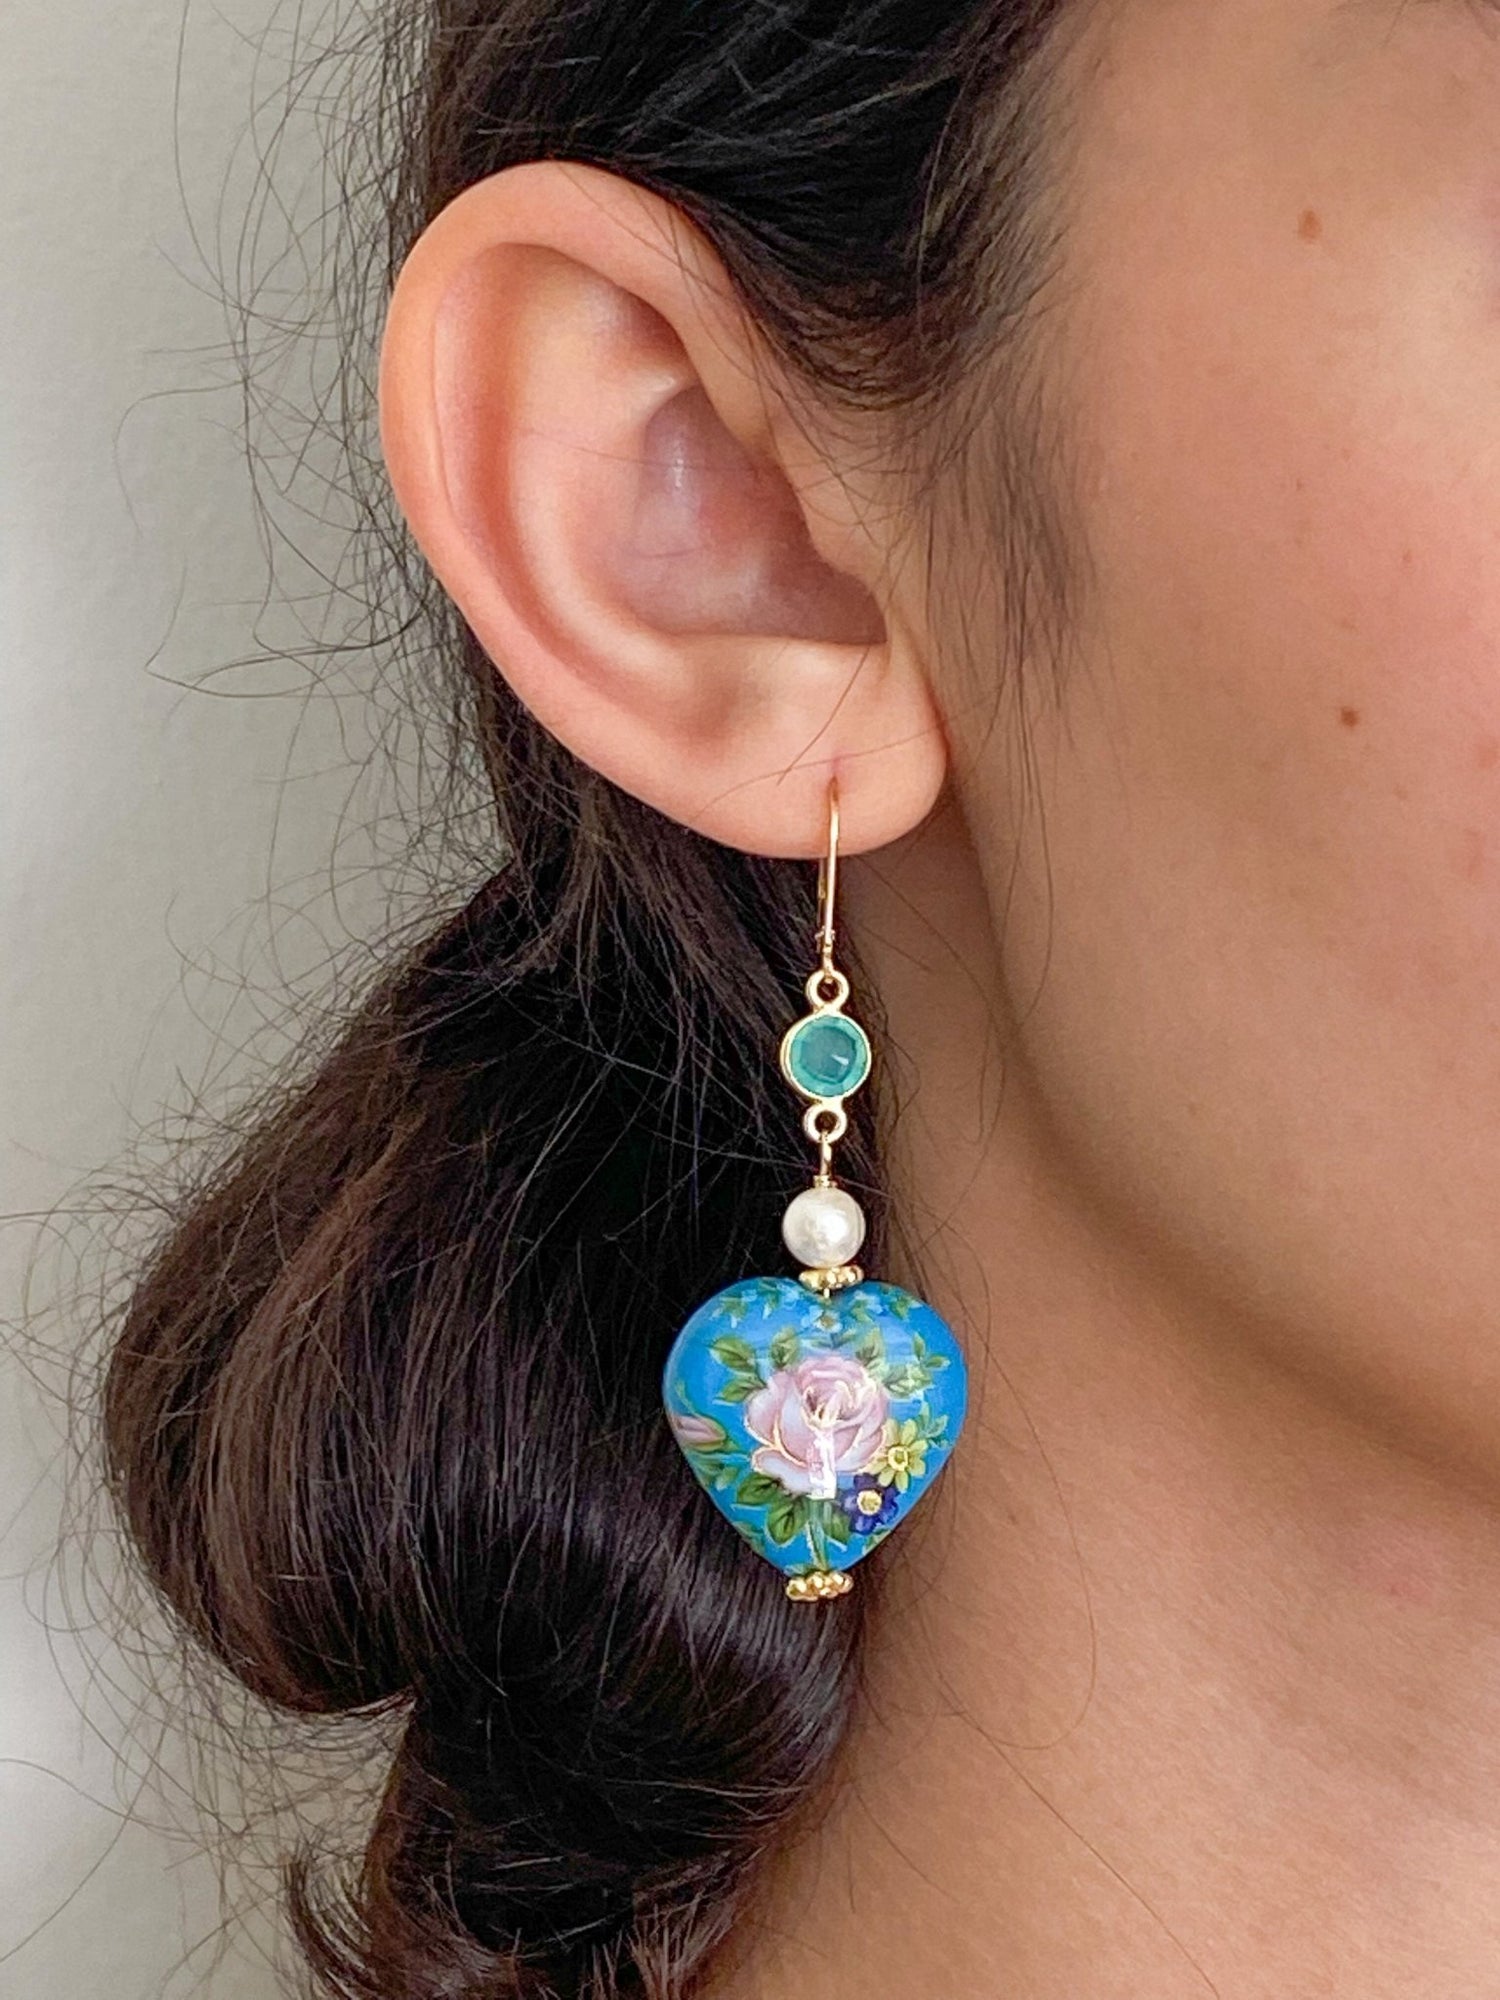 Turquoise Floral Resin Heart Gold Drop Earrings with Cultured Pearls and Chrysoprase by Sage Machado - The Sage Lifestyle